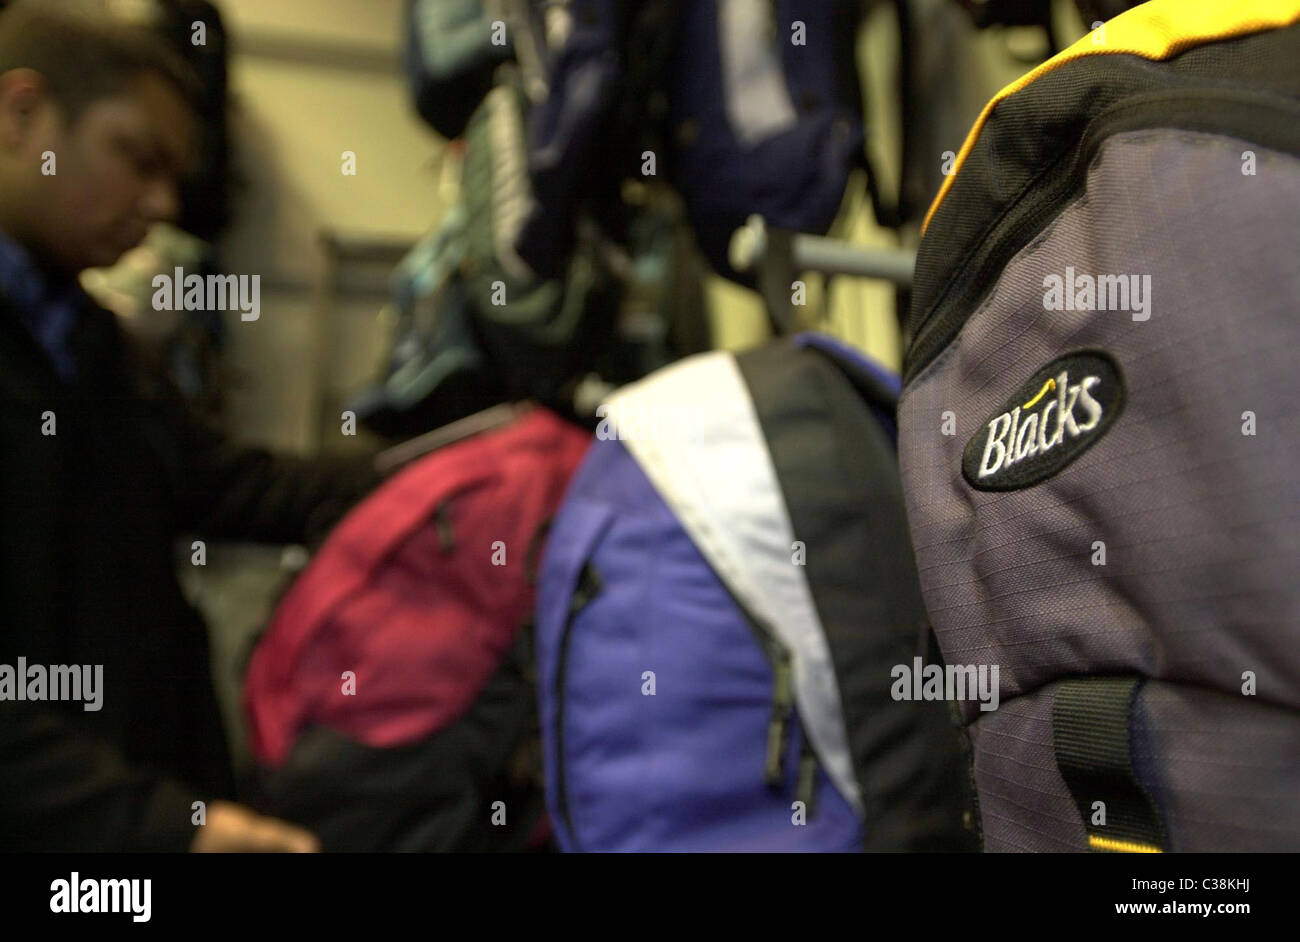 A customers browsing the backpacks sections in a Blacks store Stock Photo